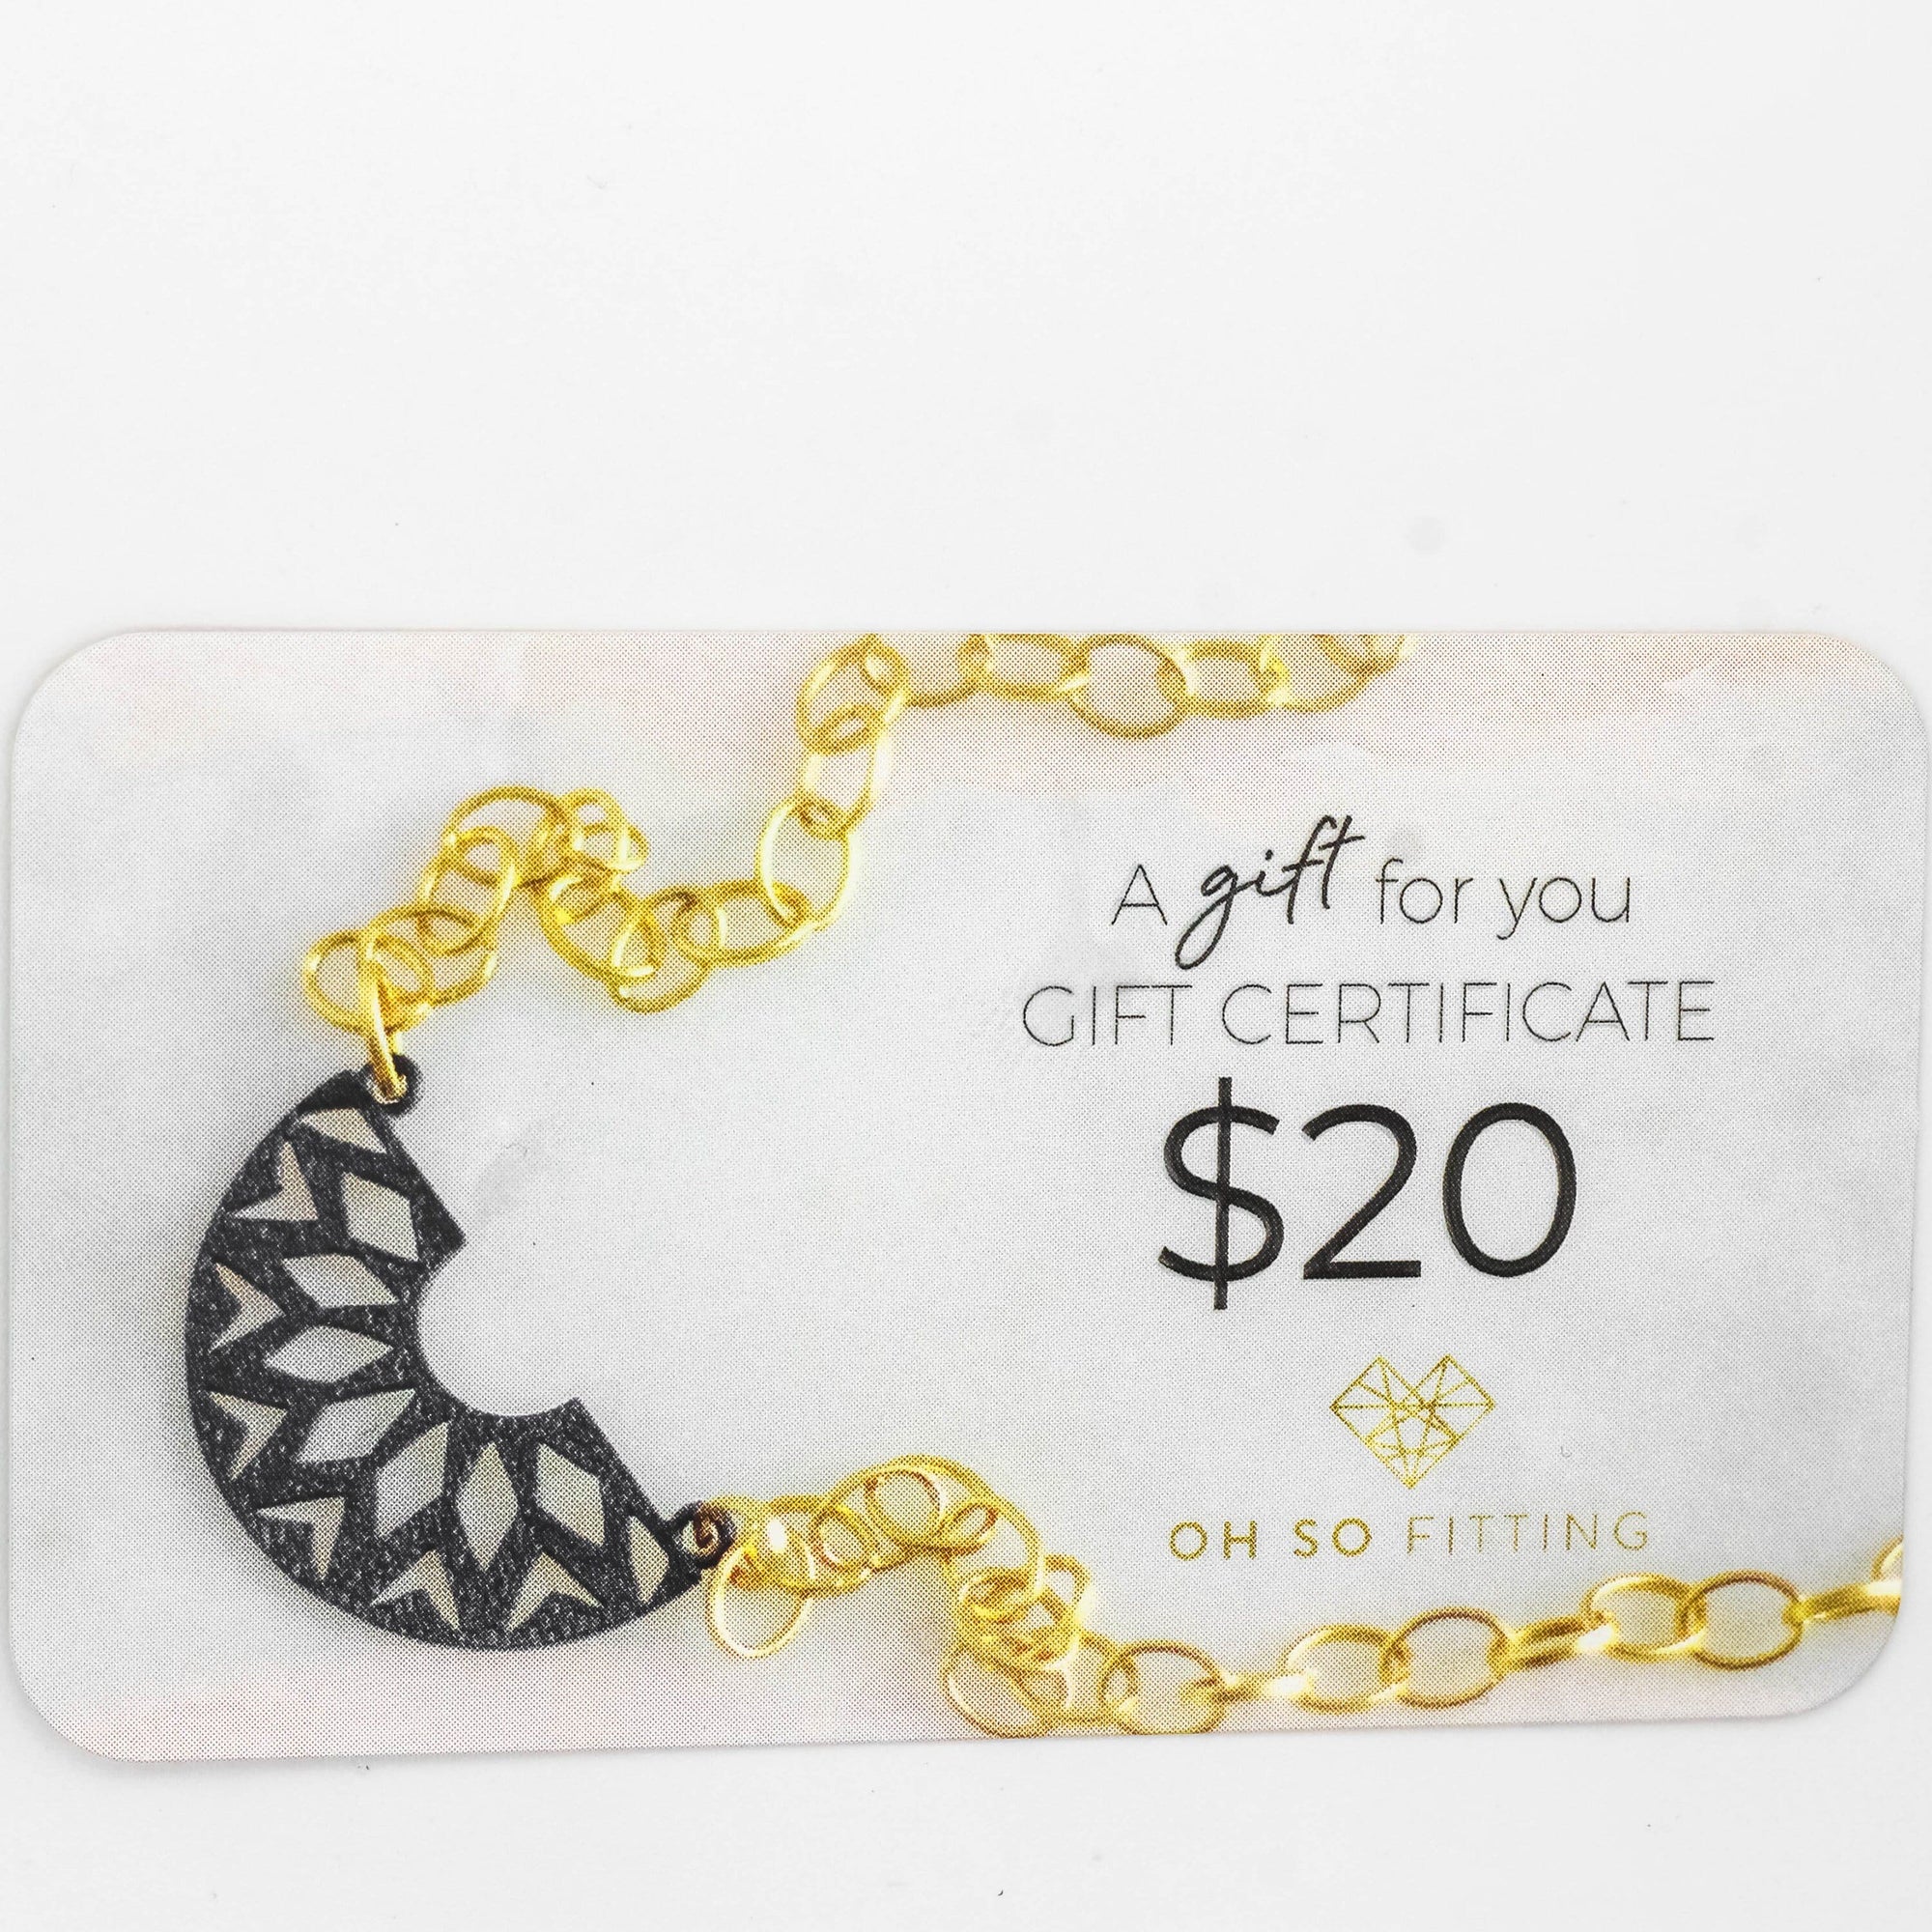 Gift Card for $20 to Spend at Oh So Fitting